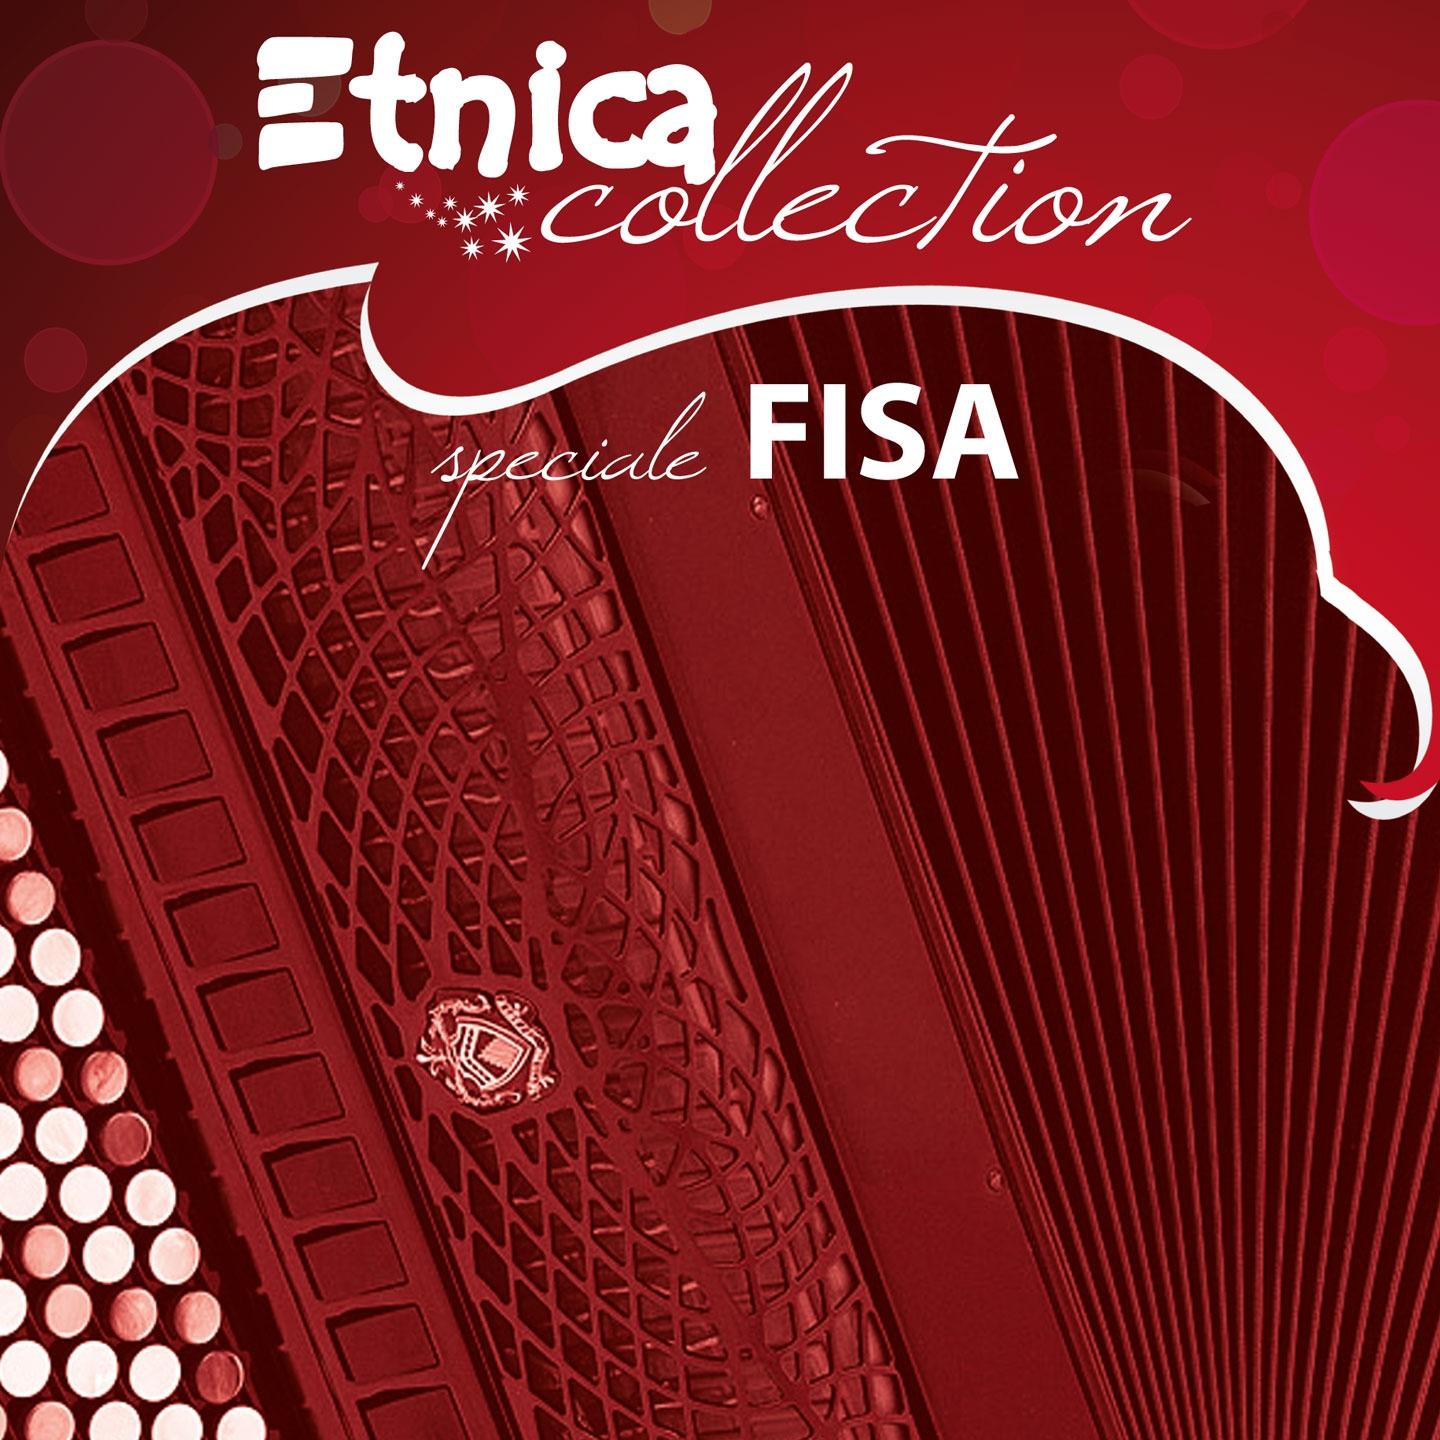 Etnica collection: speciale fisa